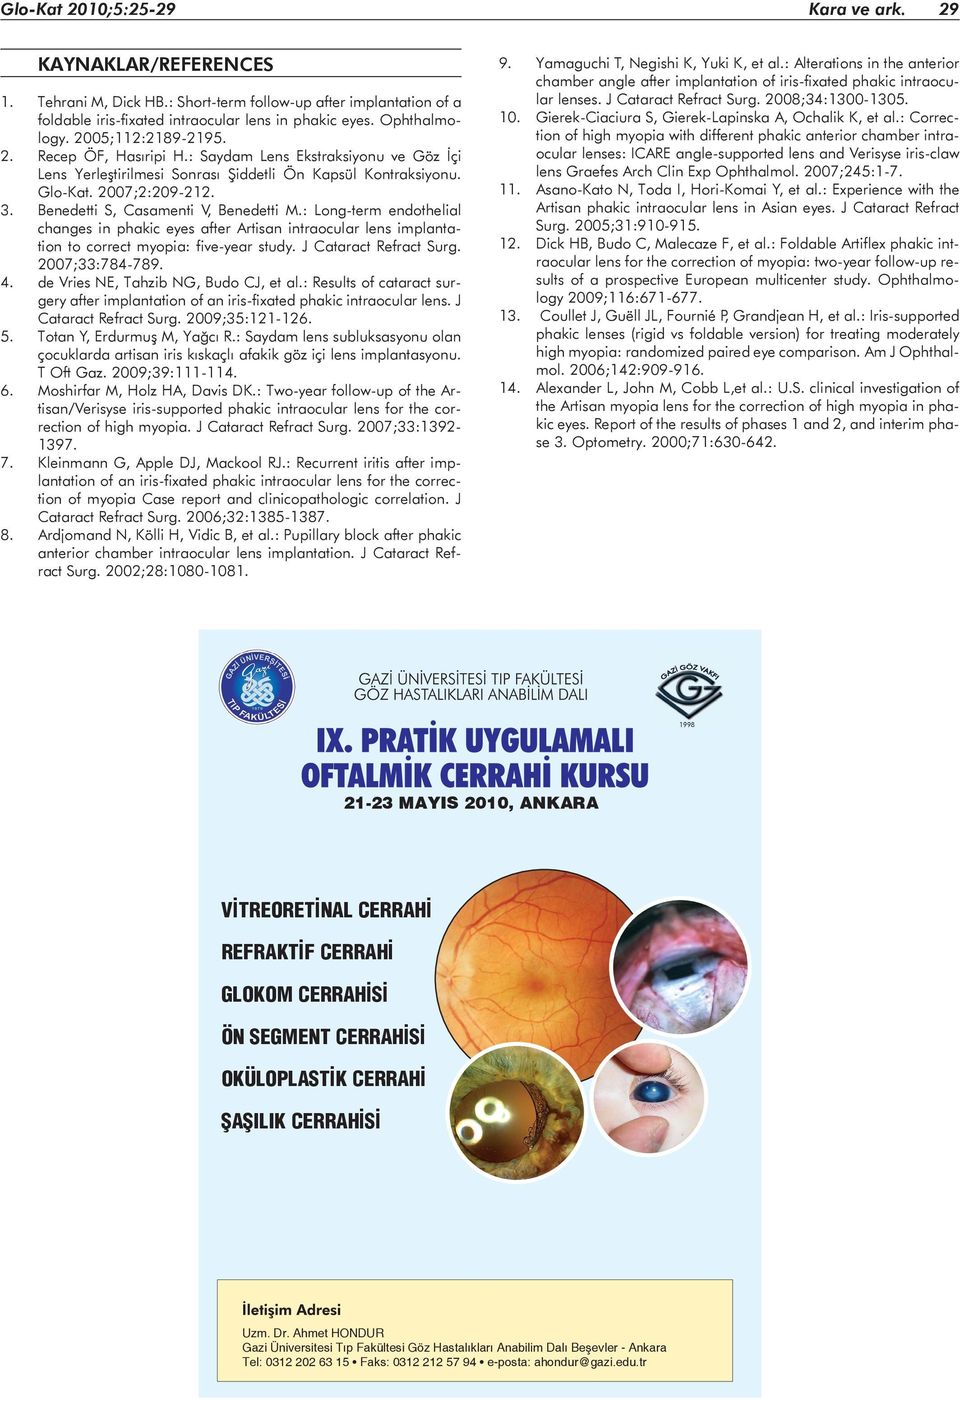 Benedetti S, Casamenti V, Benedetti M.: Long-term endothelial changes in phakic eyes after Artisan intraocular lens implantation to correct myopia: five-year study. J Cataract Refract Surg.